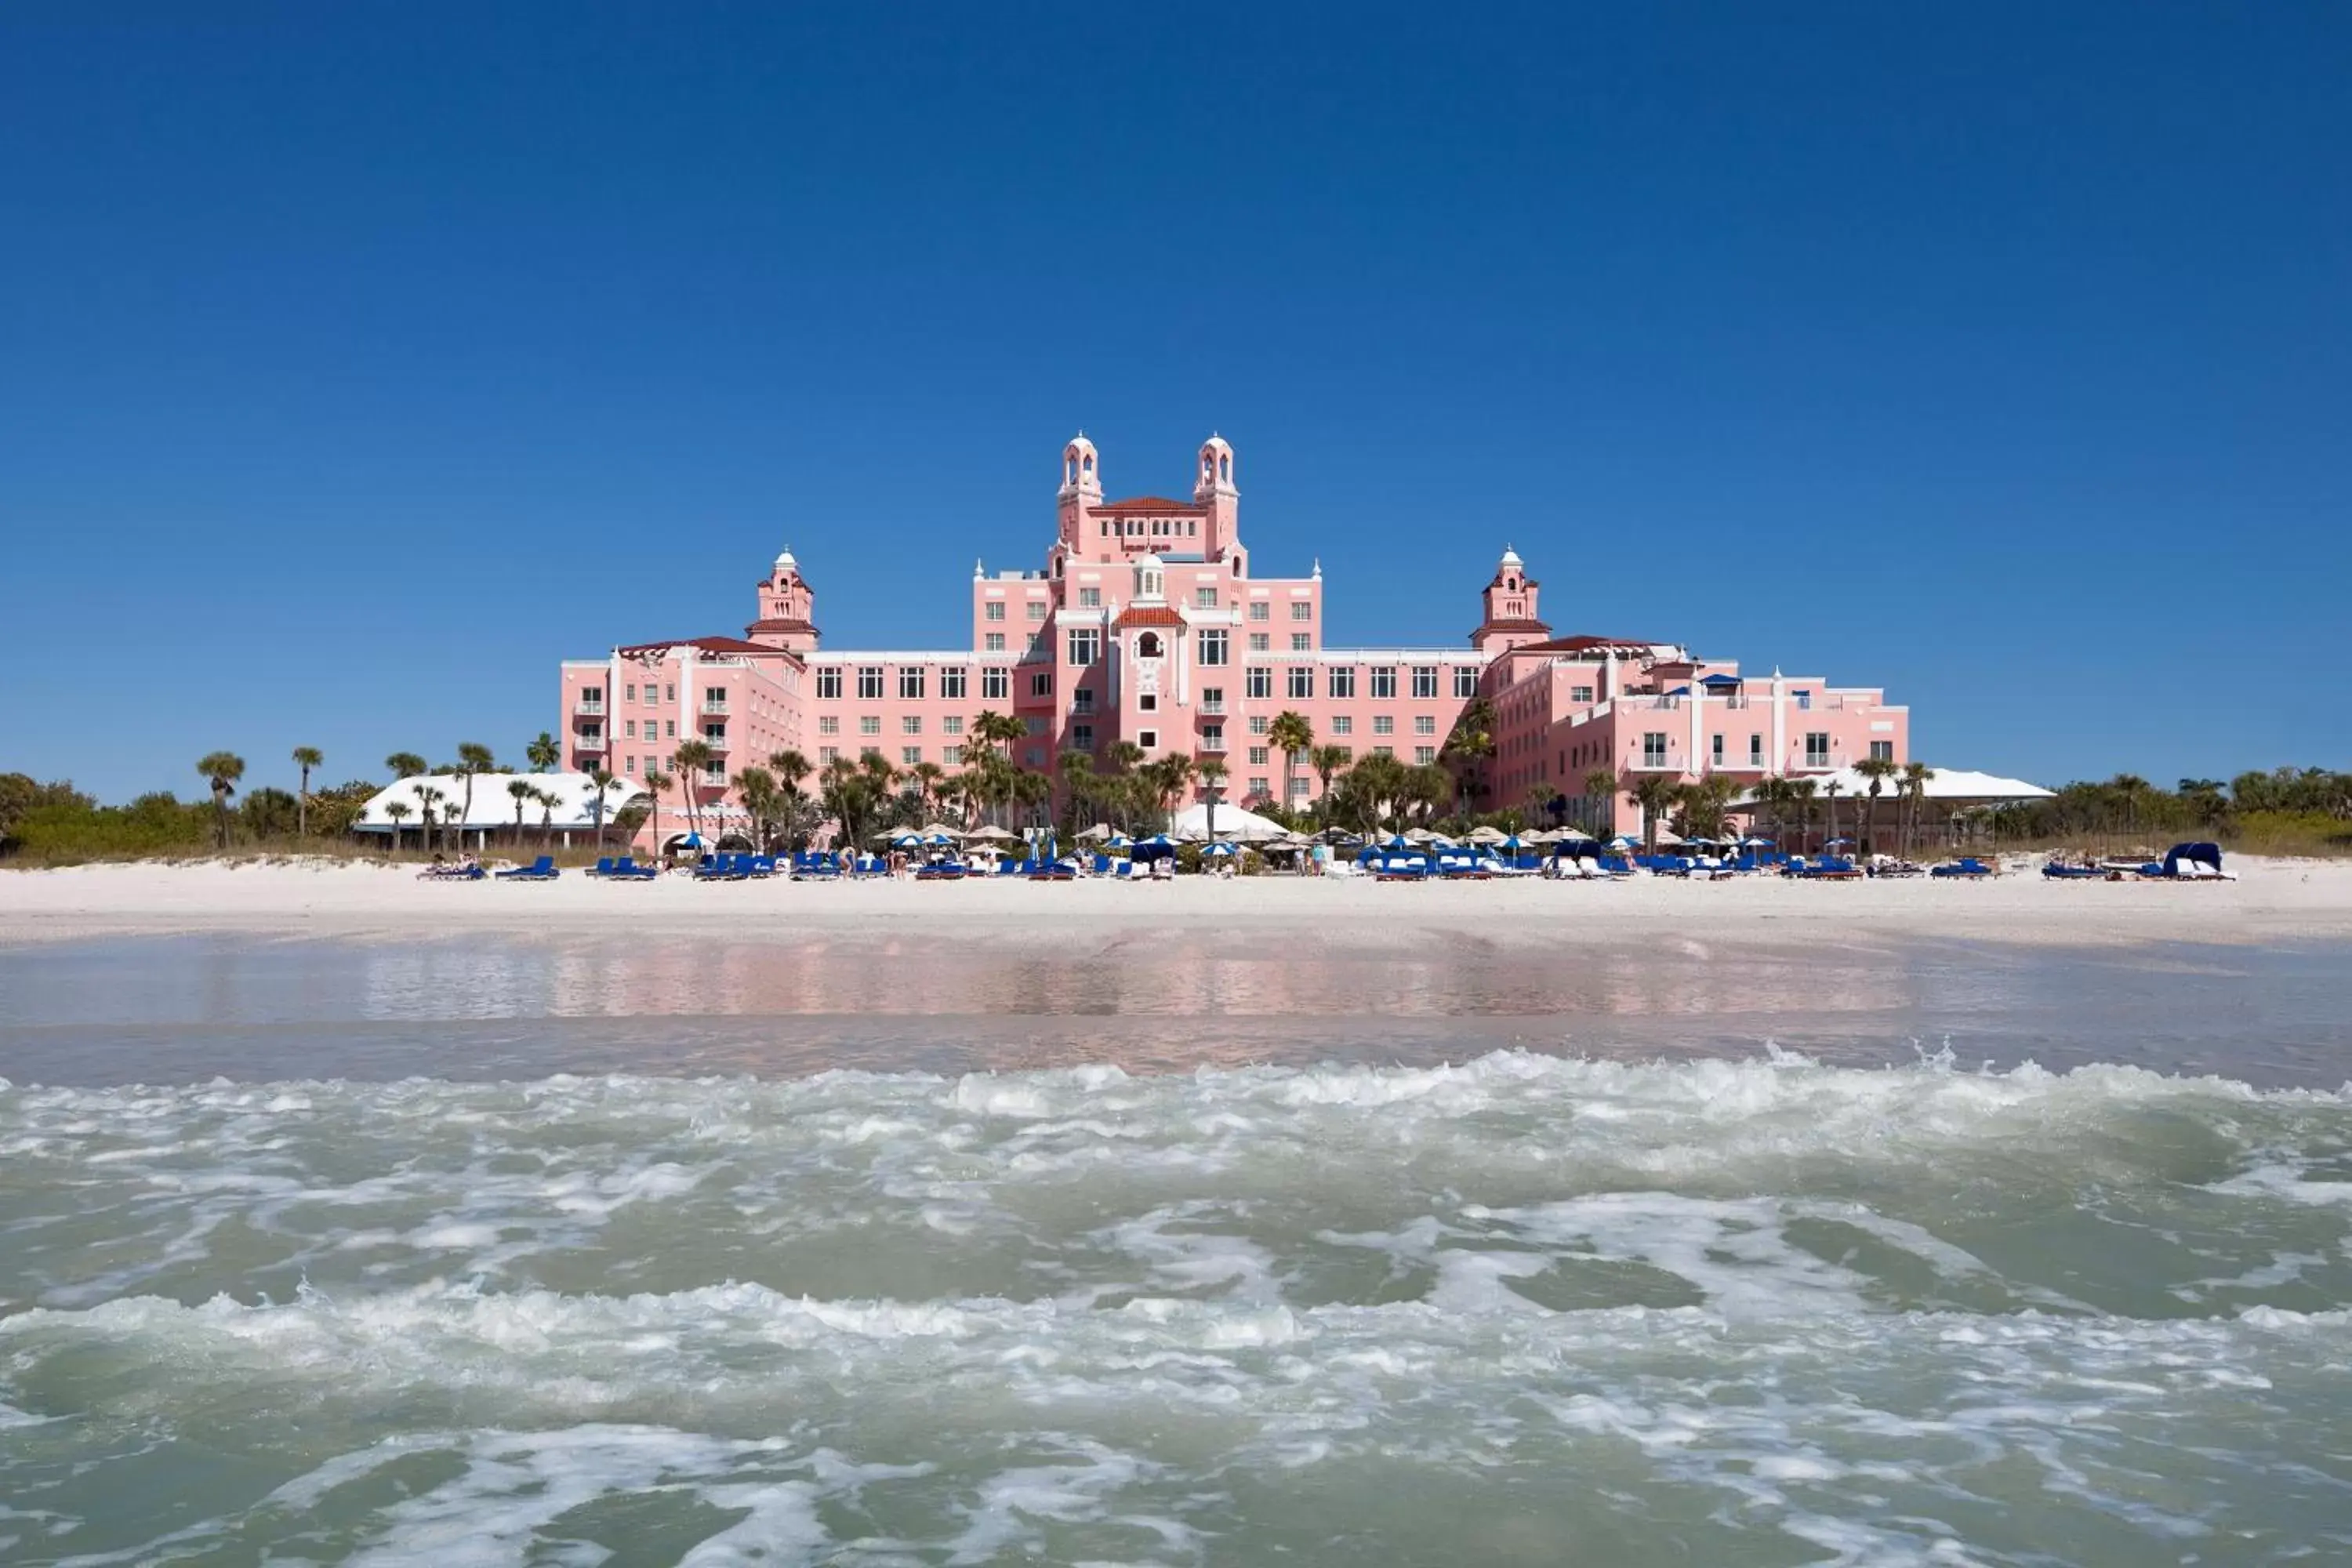 Property building in The Don CeSar